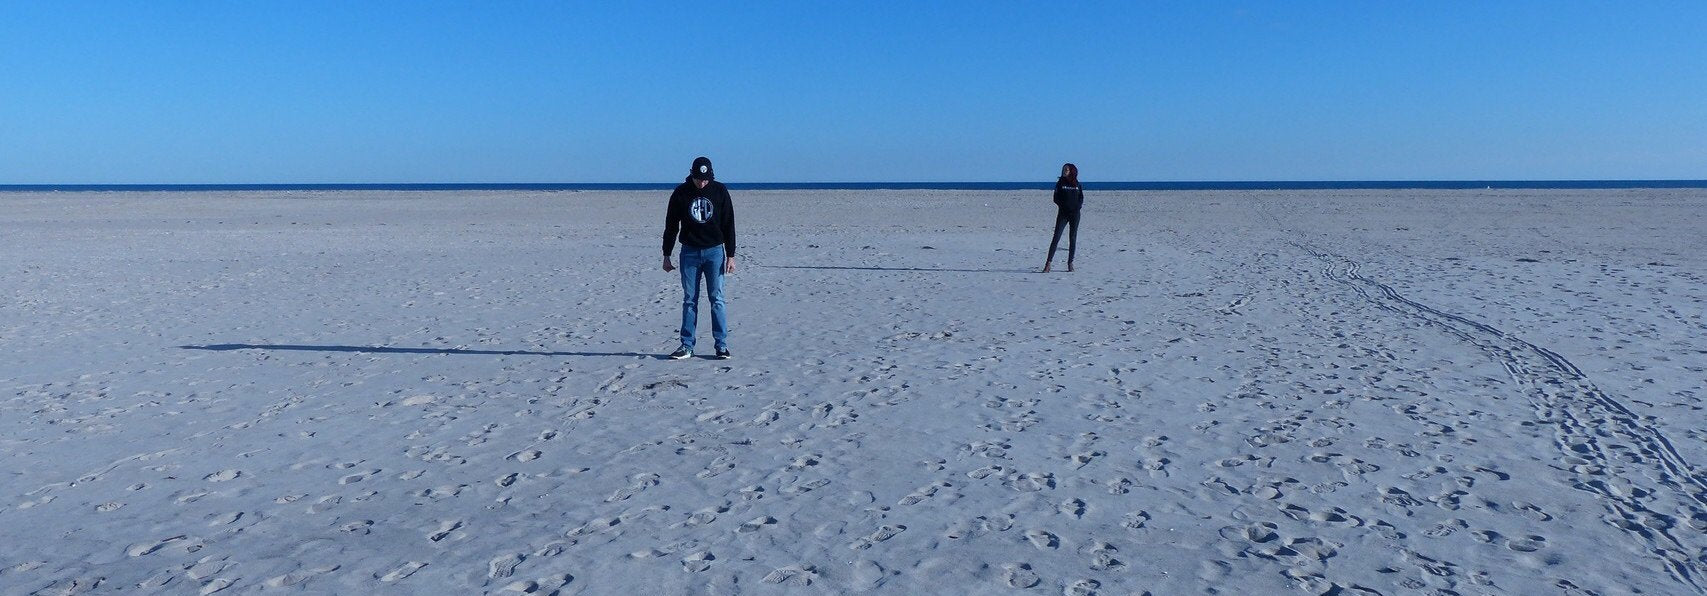 Man in the front of the image, woman in the background, wearing GFL sweaters on the beach